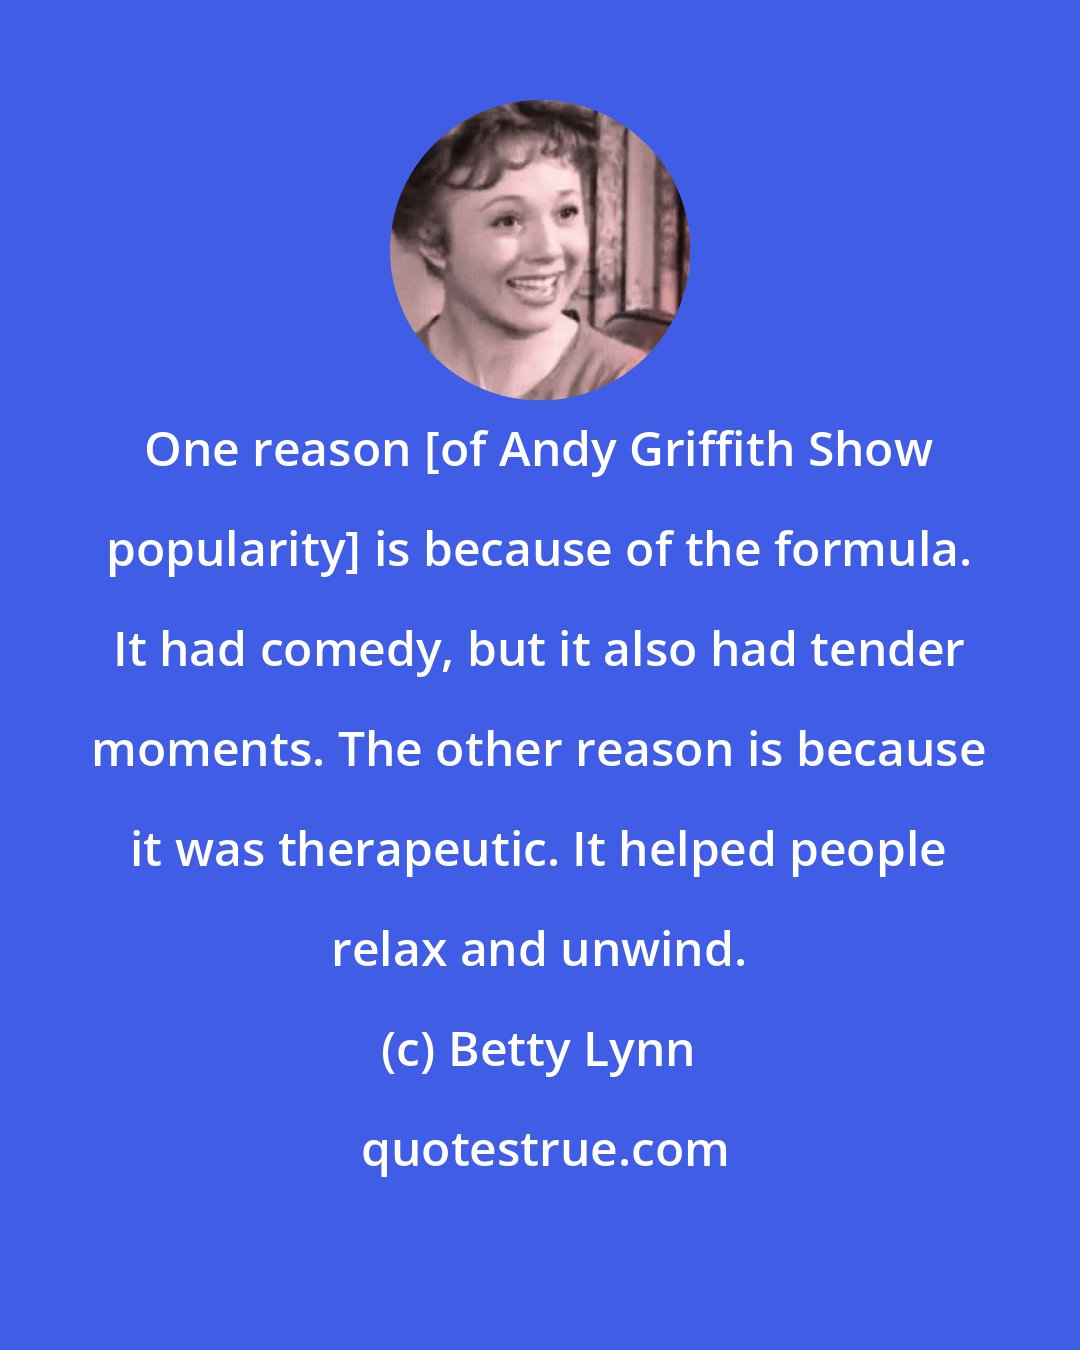 Betty Lynn: One reason [of Andy Griffith Show popularity] is because of the formula. It had comedy, but it also had tender moments. The other reason is because it was therapeutic. It helped people relax and unwind.